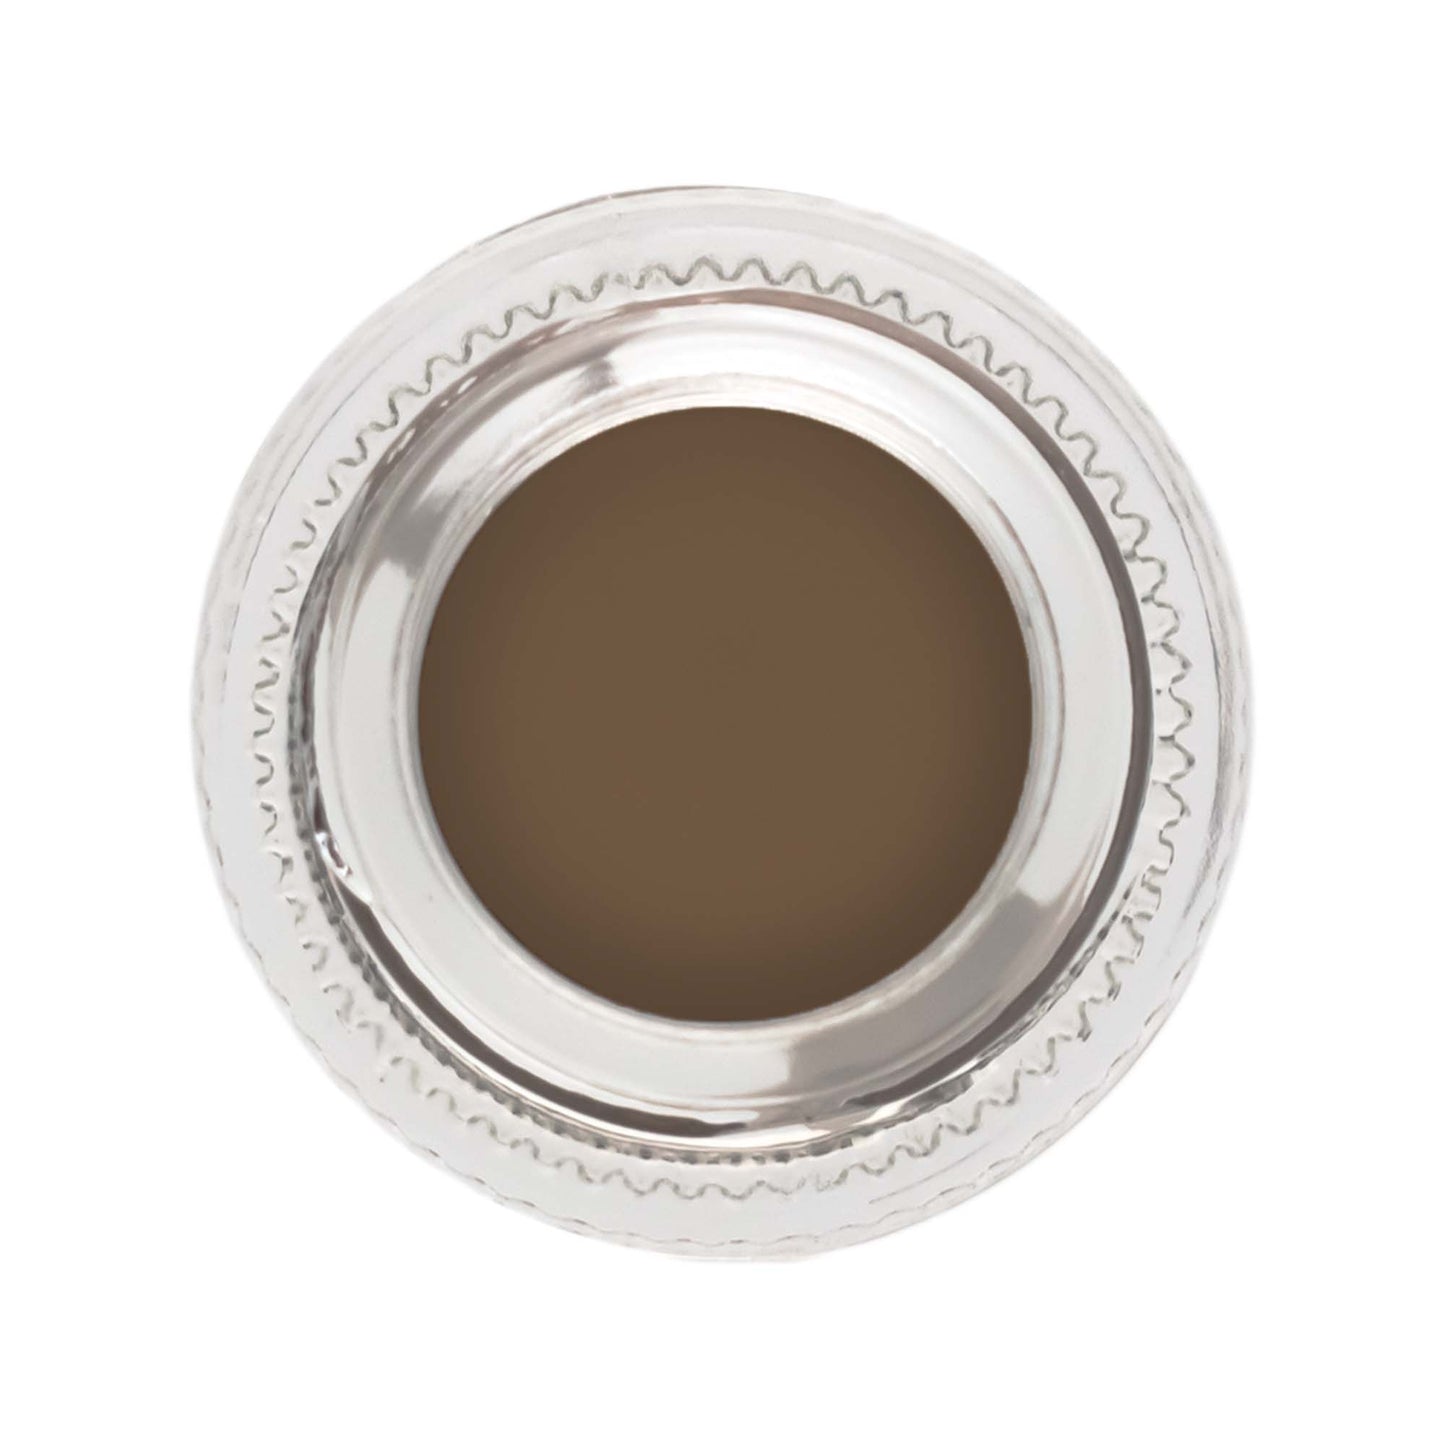 Introduce your brows to the nourishing and strengthening benefits of Cruisin Organics Truffle Brow Pomade. Our high-quality formula features titanium dioxide, a pigment known for its sunscreen properties, and truffle extract for long-lasting definition. Enhance the appearance of your brows with a natural yet bold look using our expertly crafted pomade.